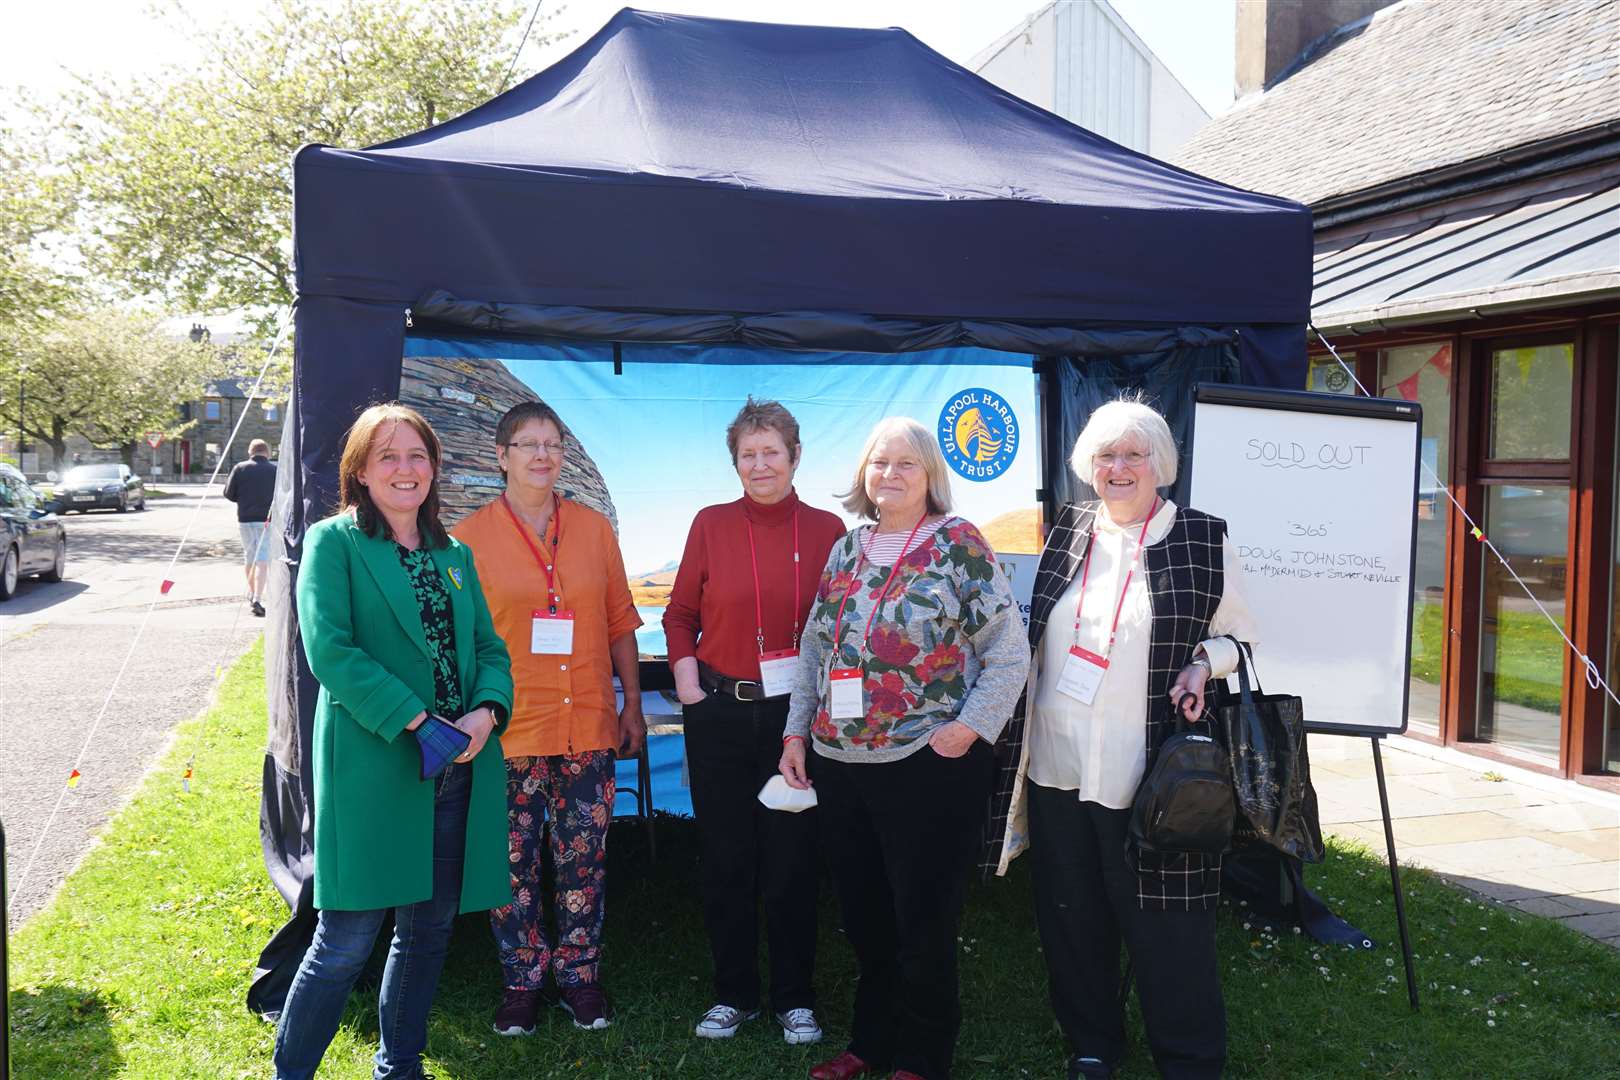 The volunteering team enjoying a pause in the sunshine at last year's edition.